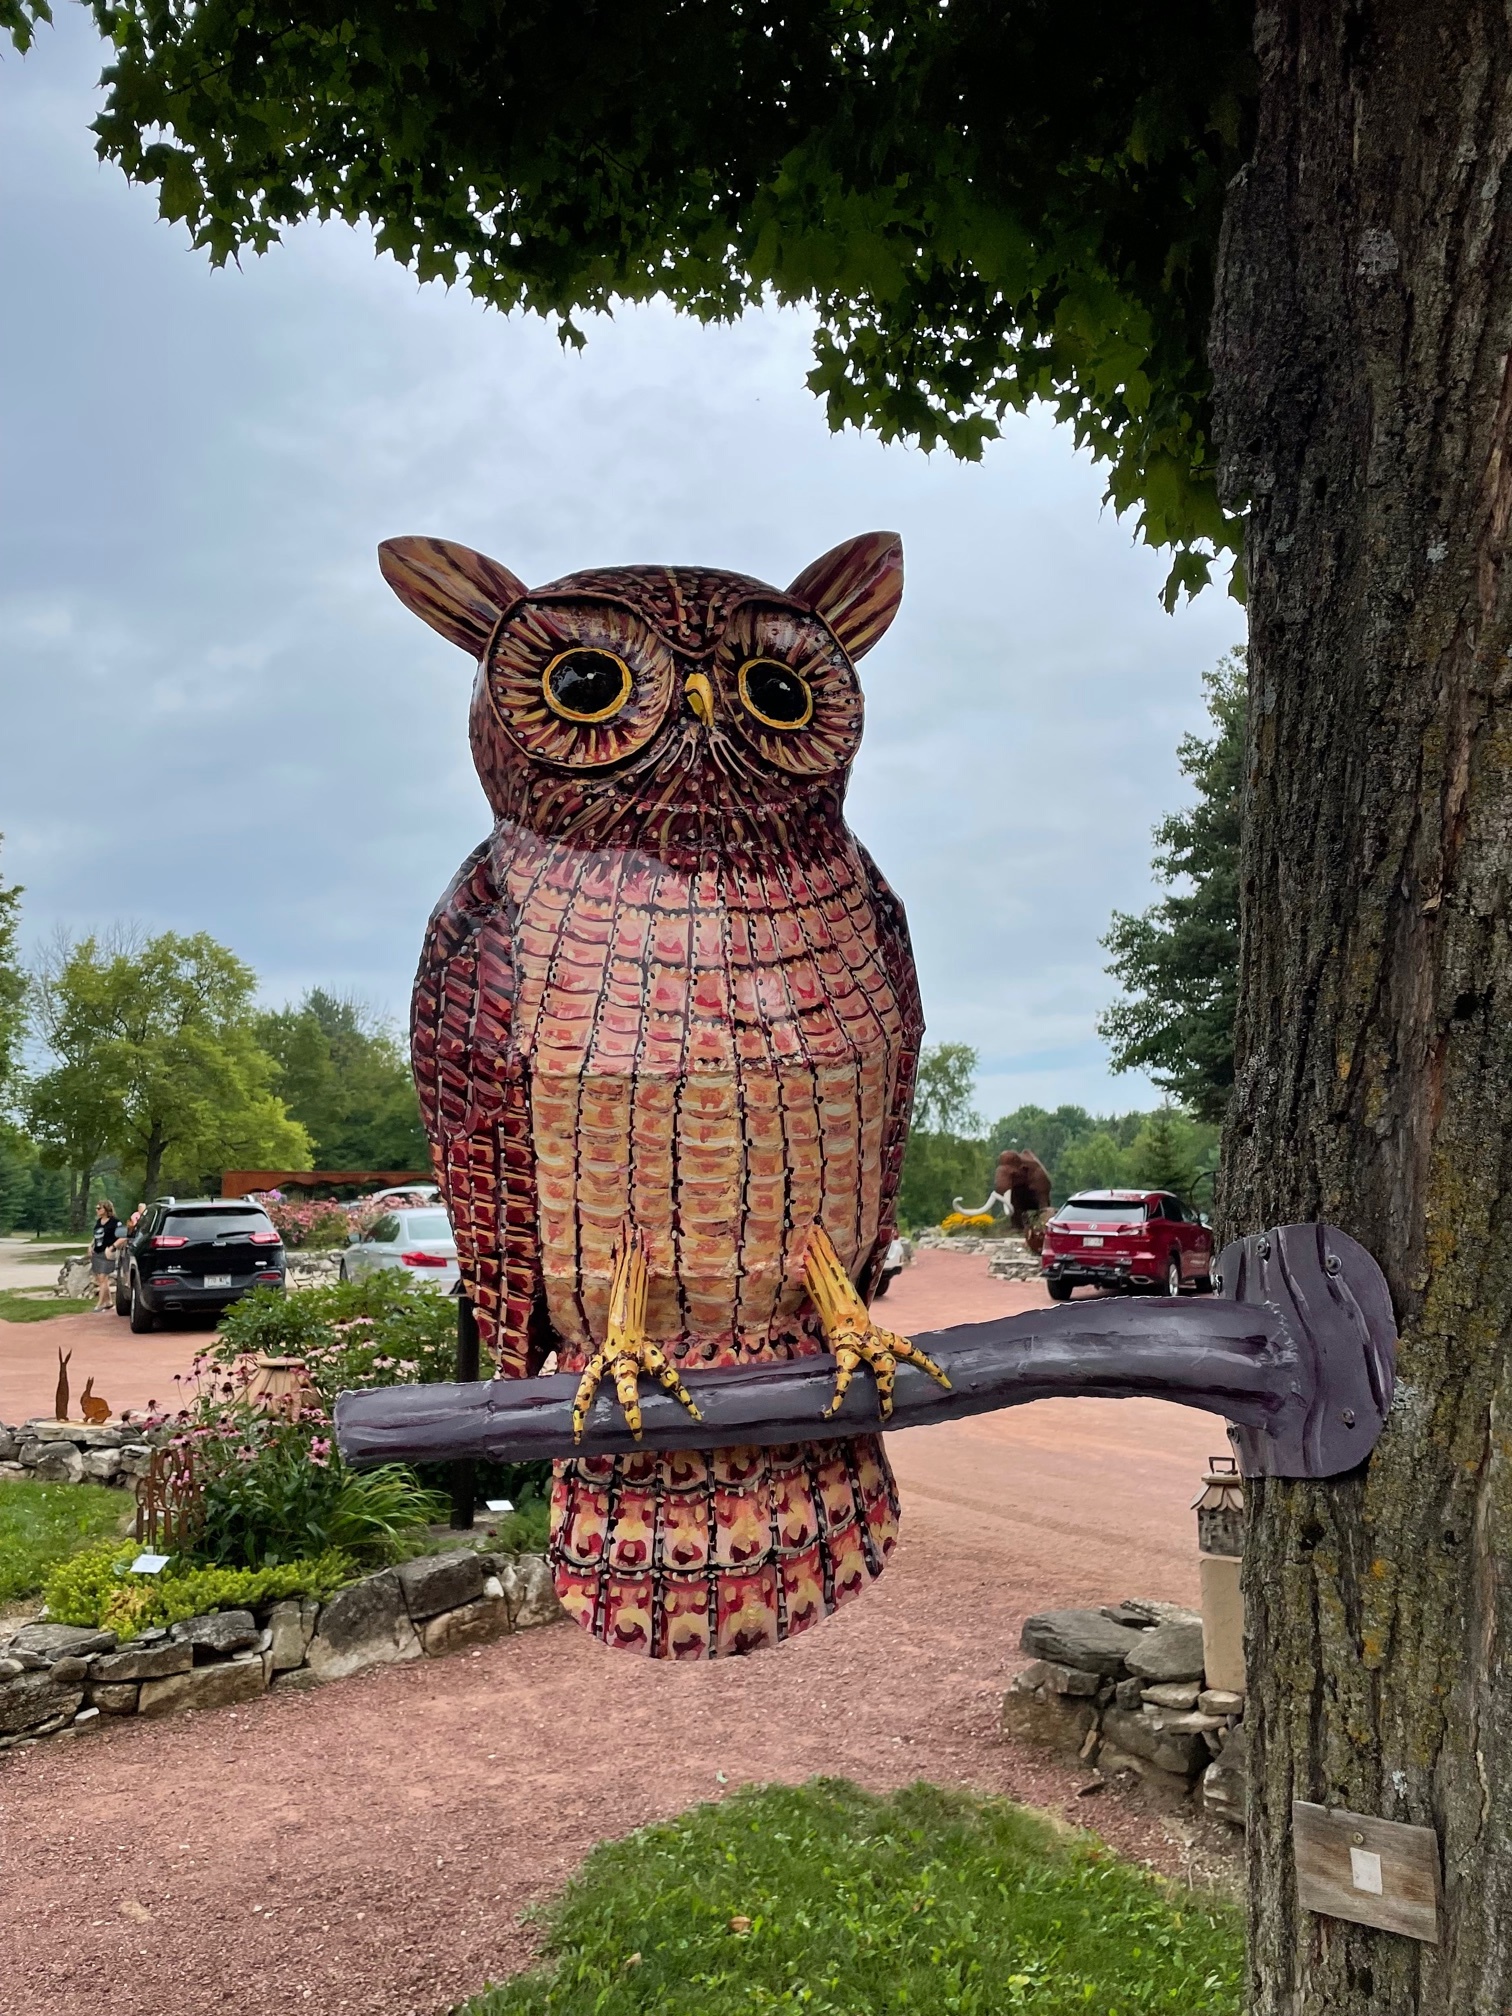 Bigger Owl on a Branch